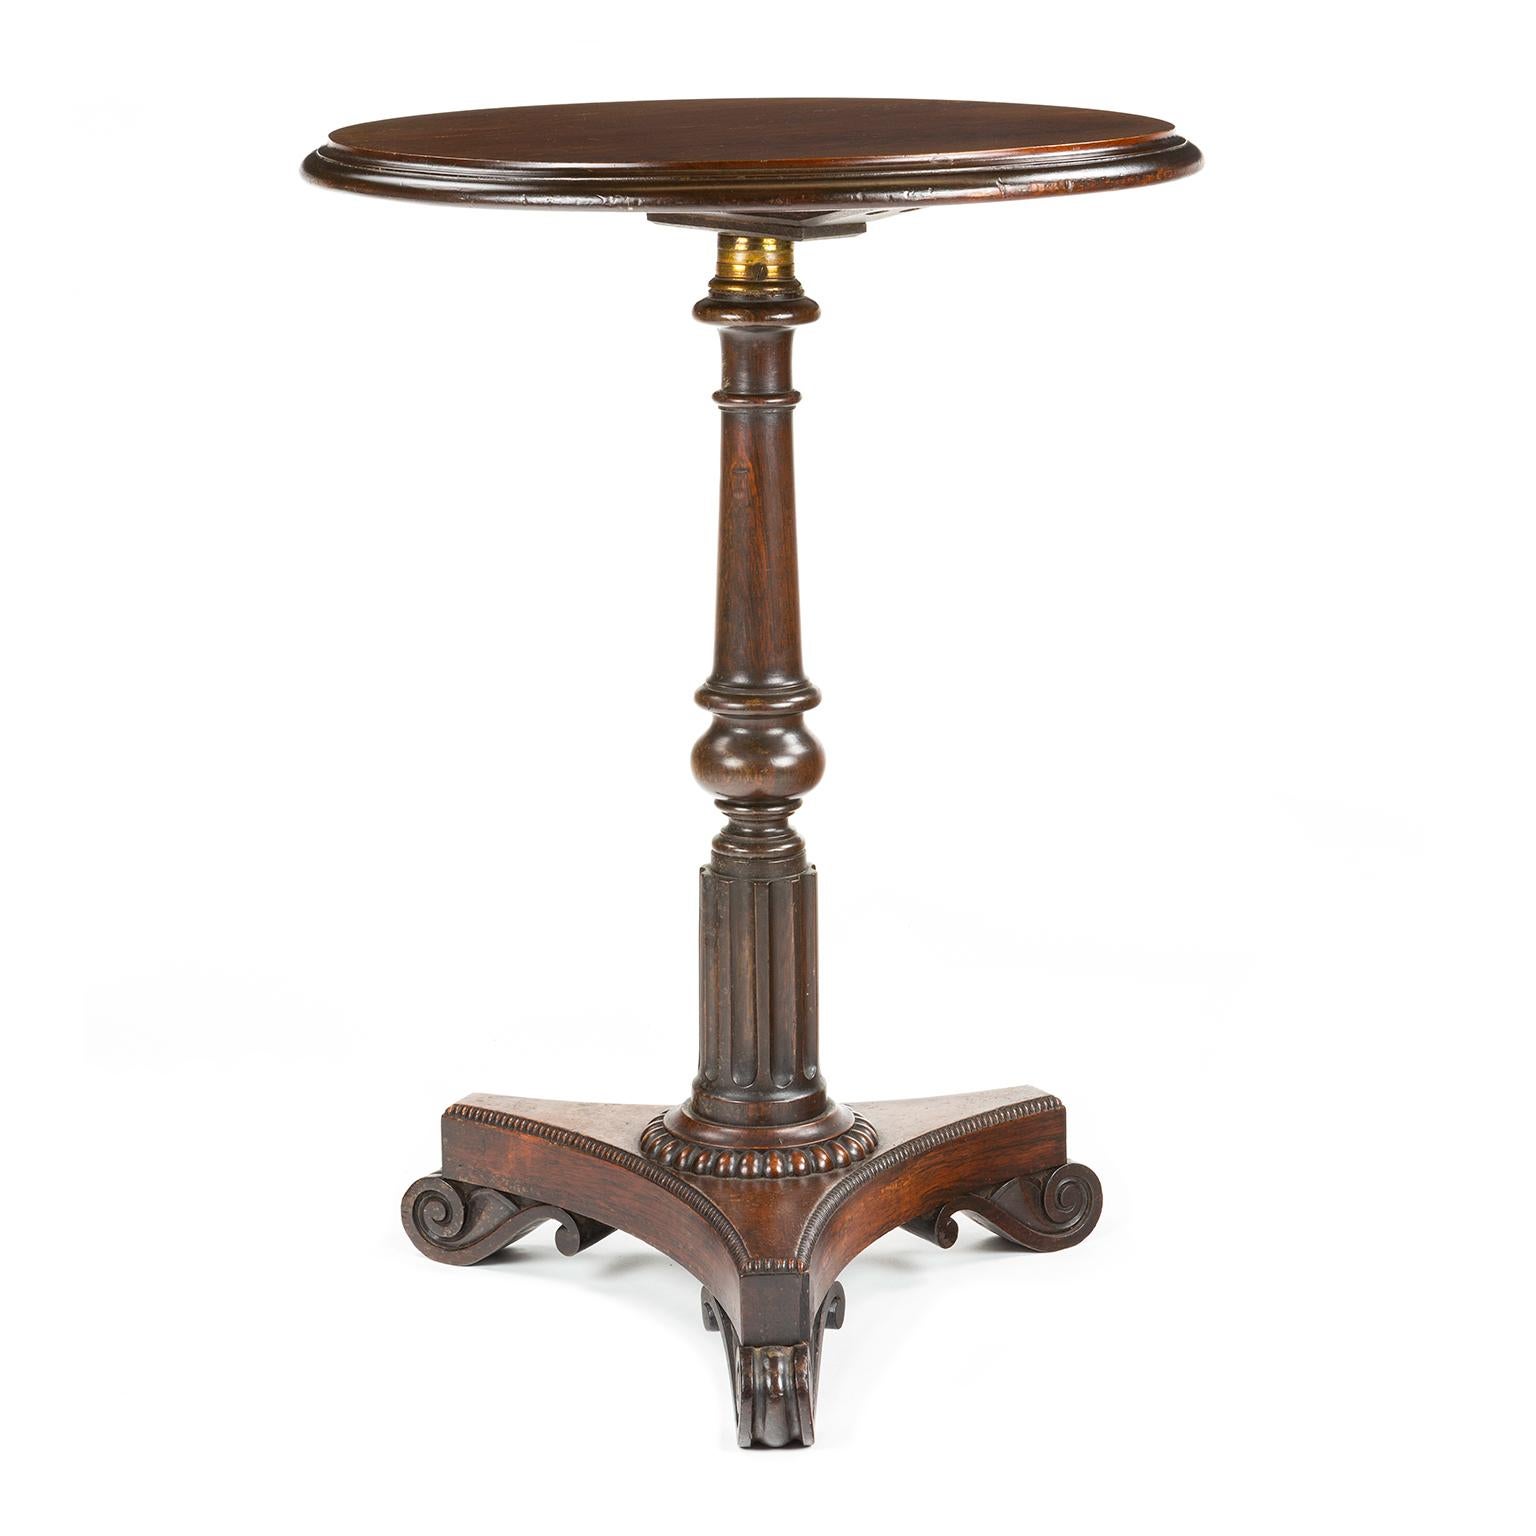 Accredited to Gillows a William IV Rosewood Wine Table 1